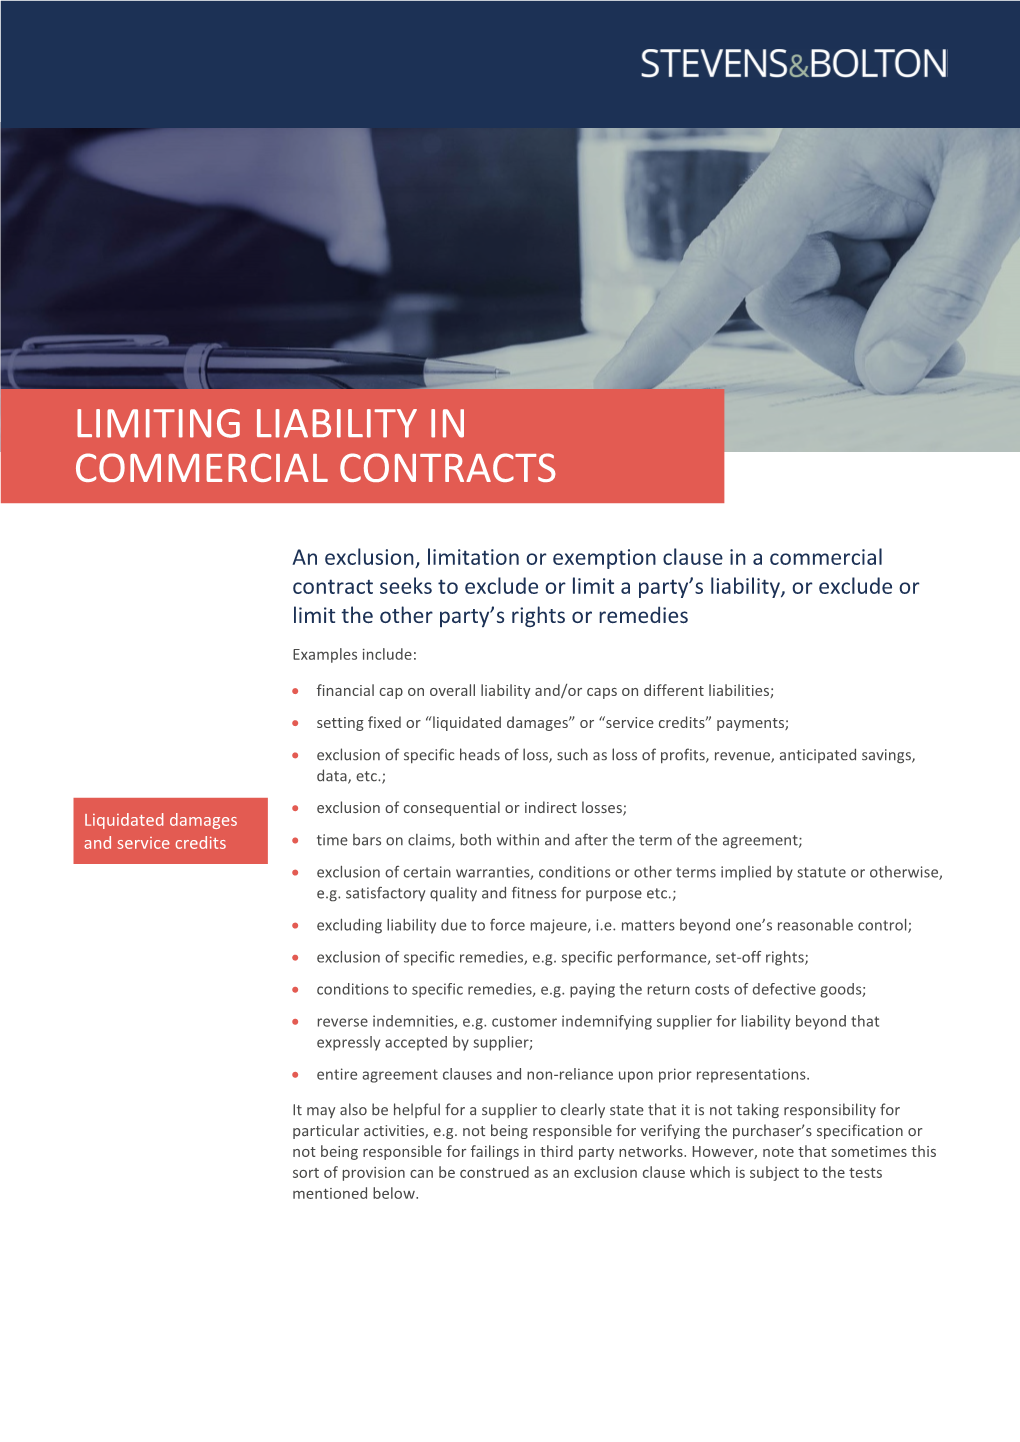 Limiting Liability in Commercial Contracts